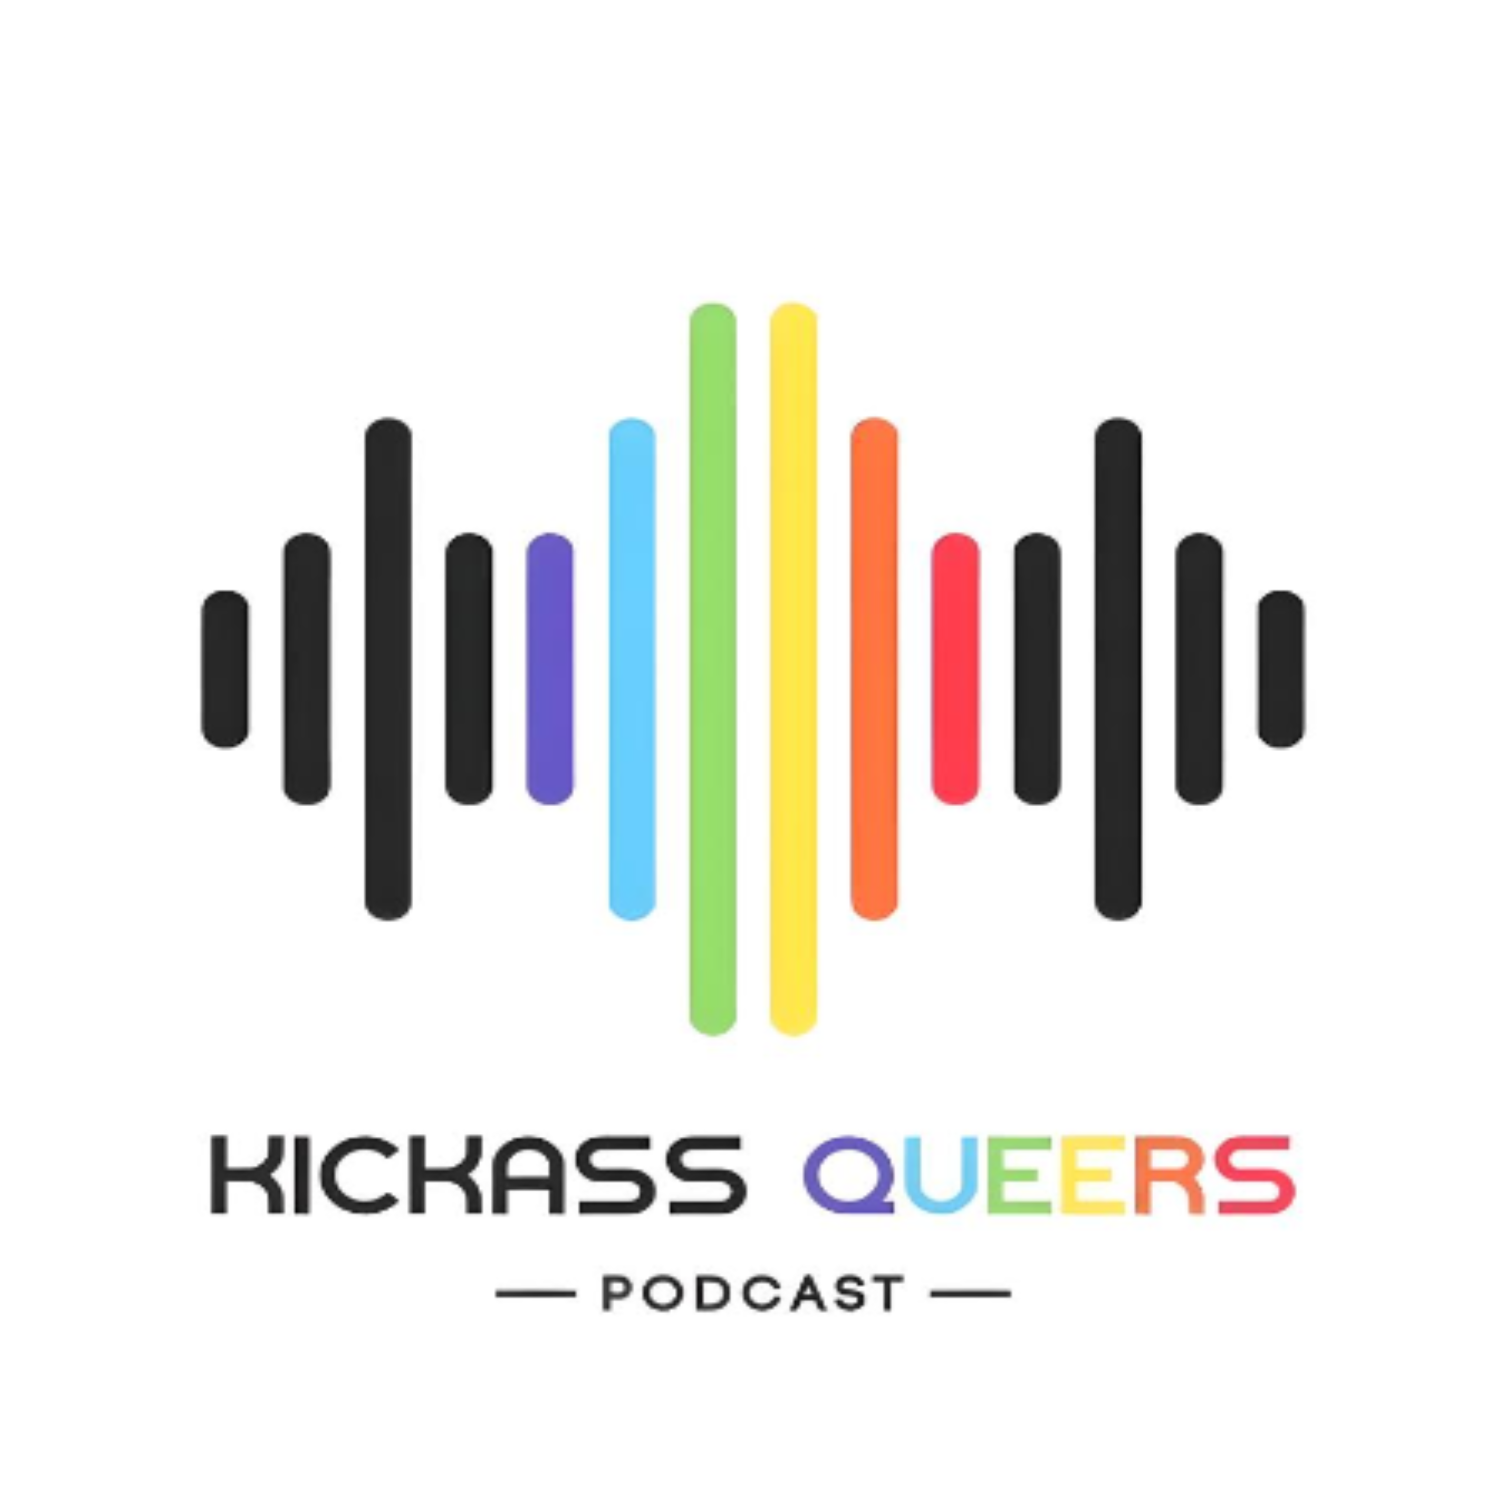 Kickass Queers Podcast